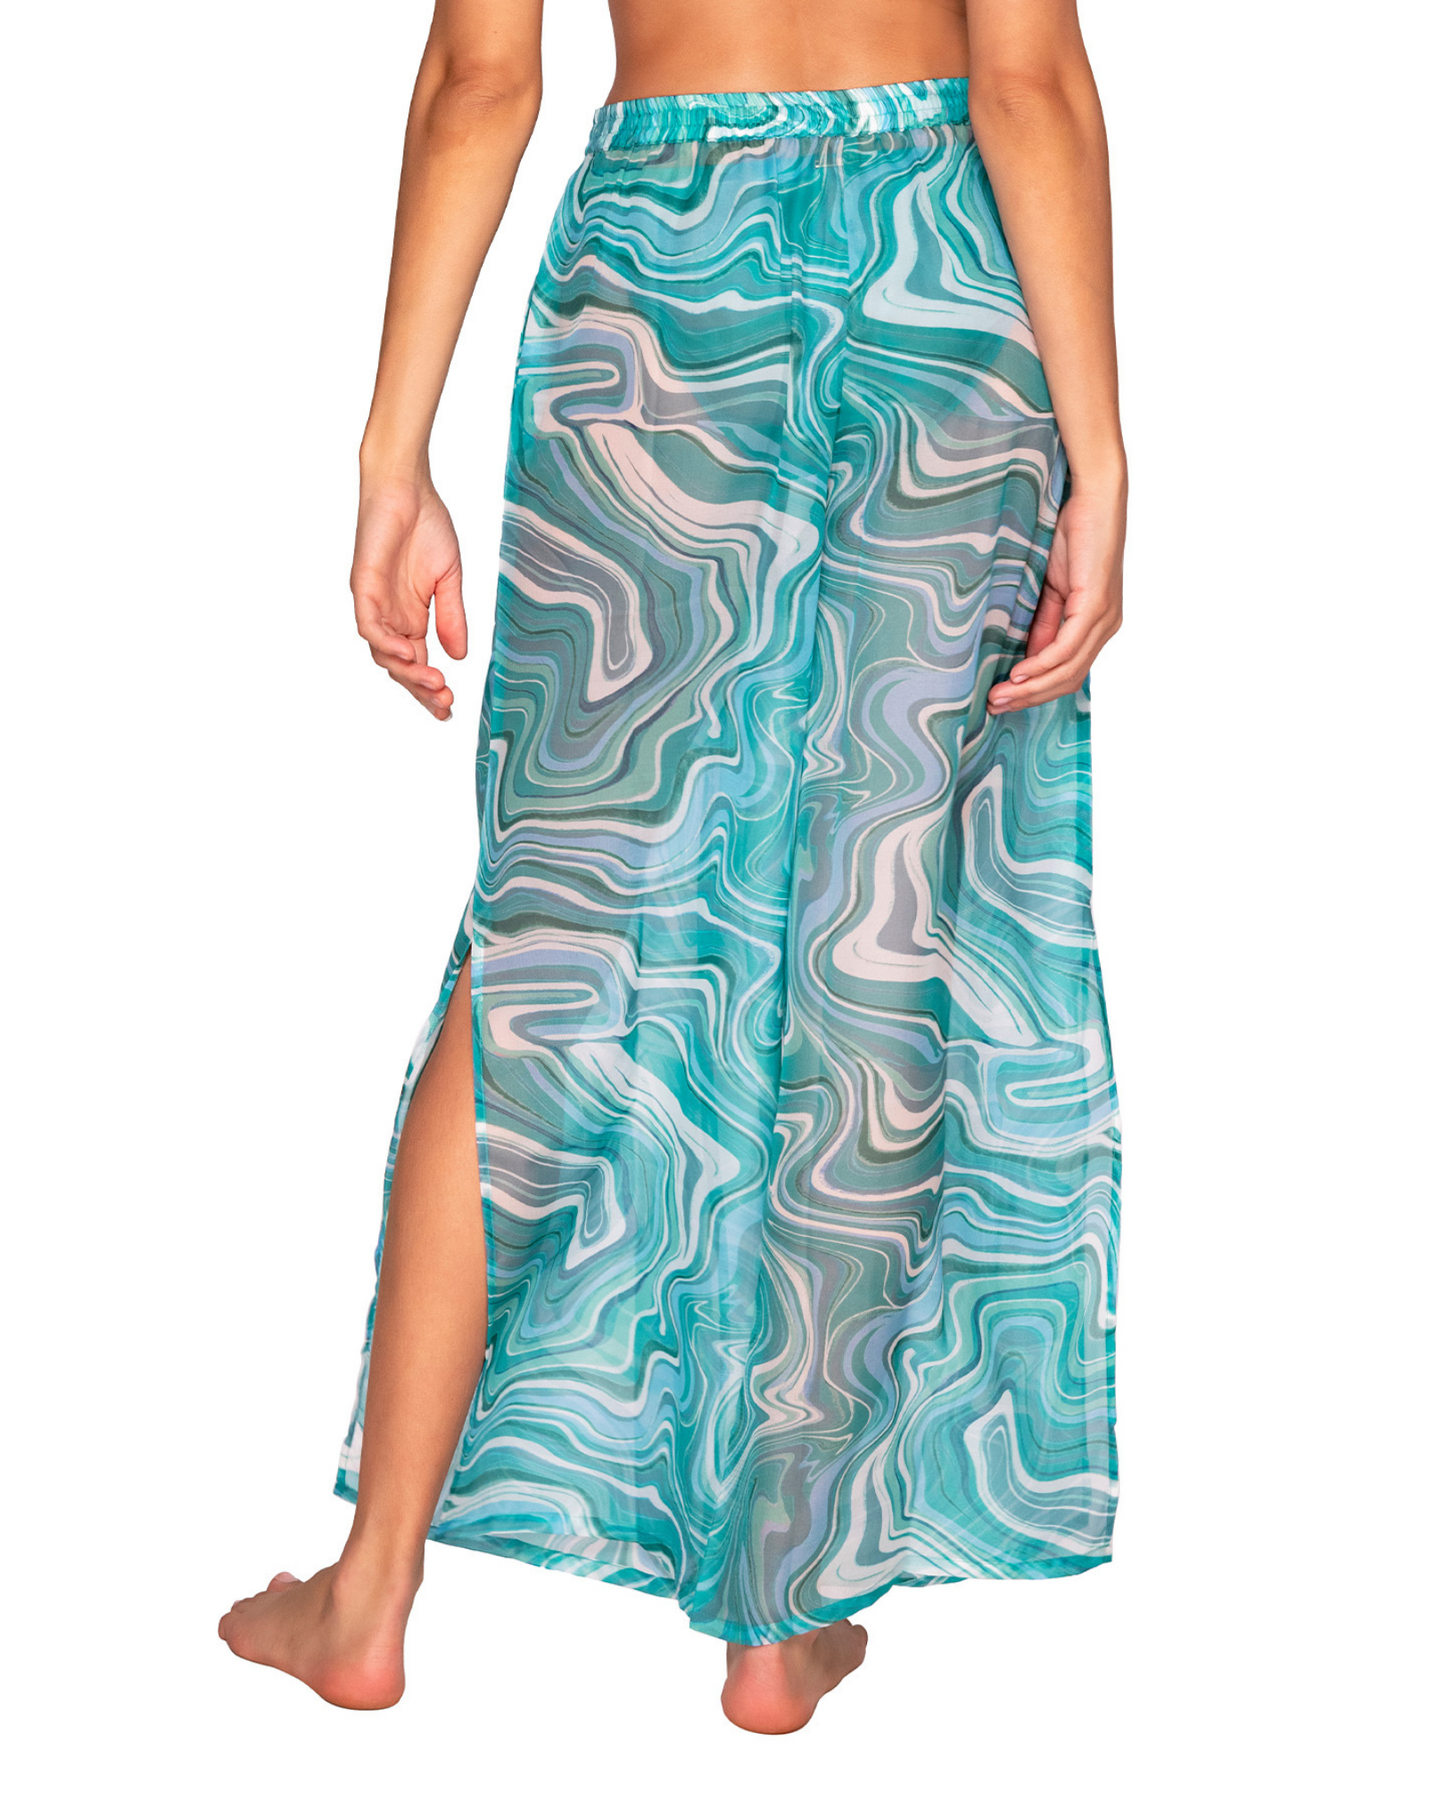 Model wearing a wide leg cover up pant with a side slit in a pale turquoise and white swirl print.